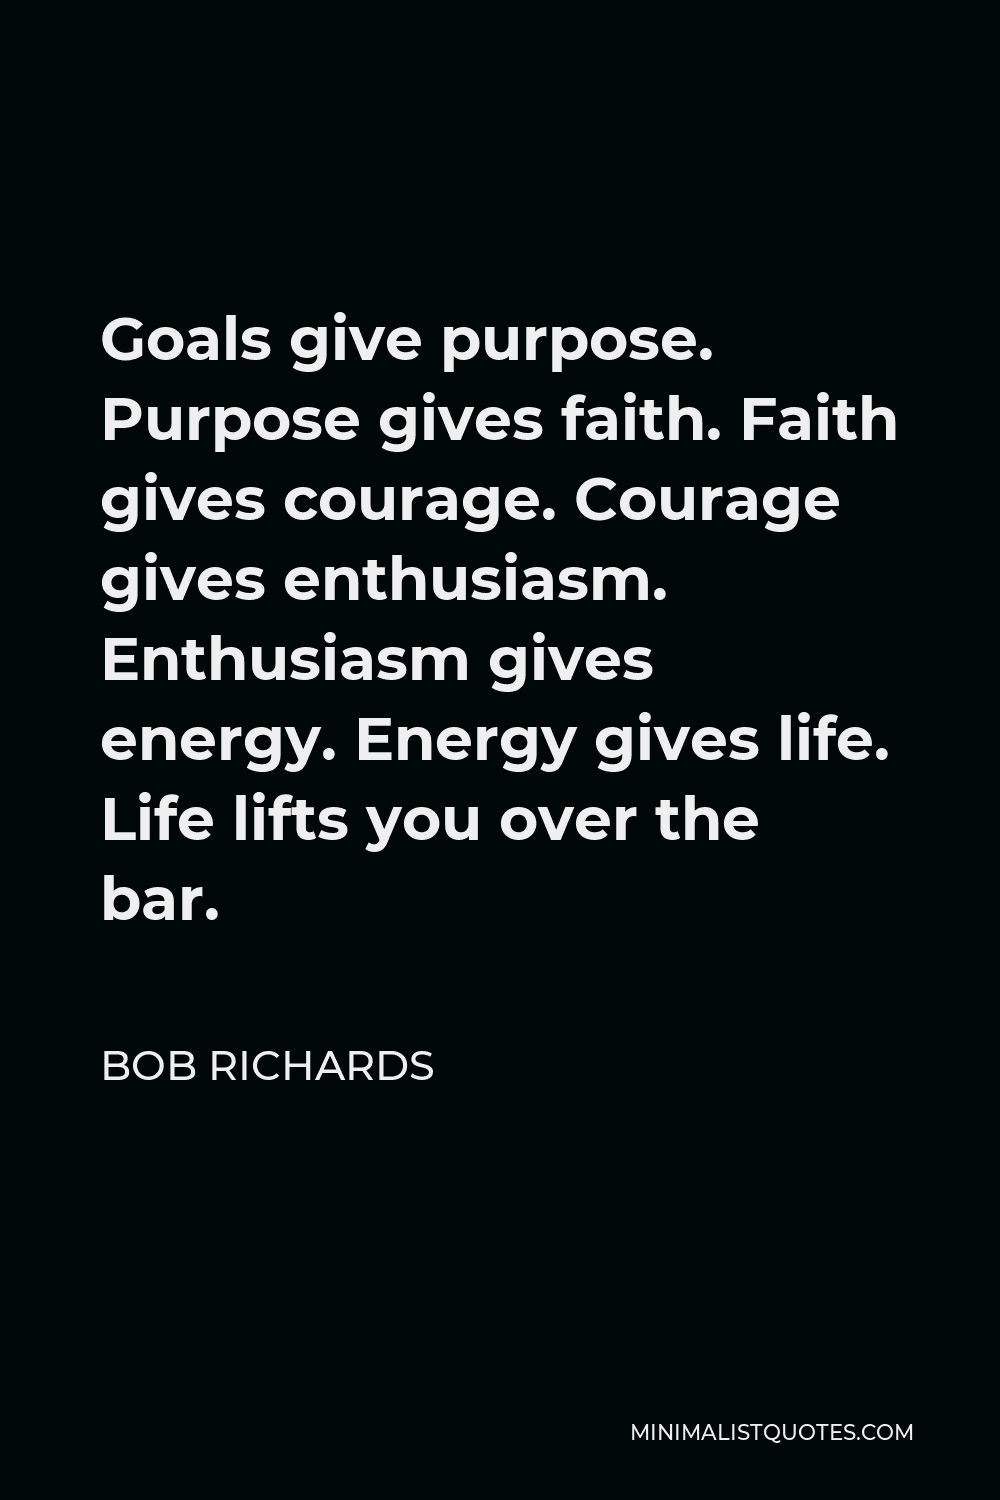 Bob Richards Quote - Goals give purpose. Purpose gives faith. Faith gives courage. Courage gives enthusiasm. Enthusiasm gives energy. Energy gives life. Life lifts you over the bar.